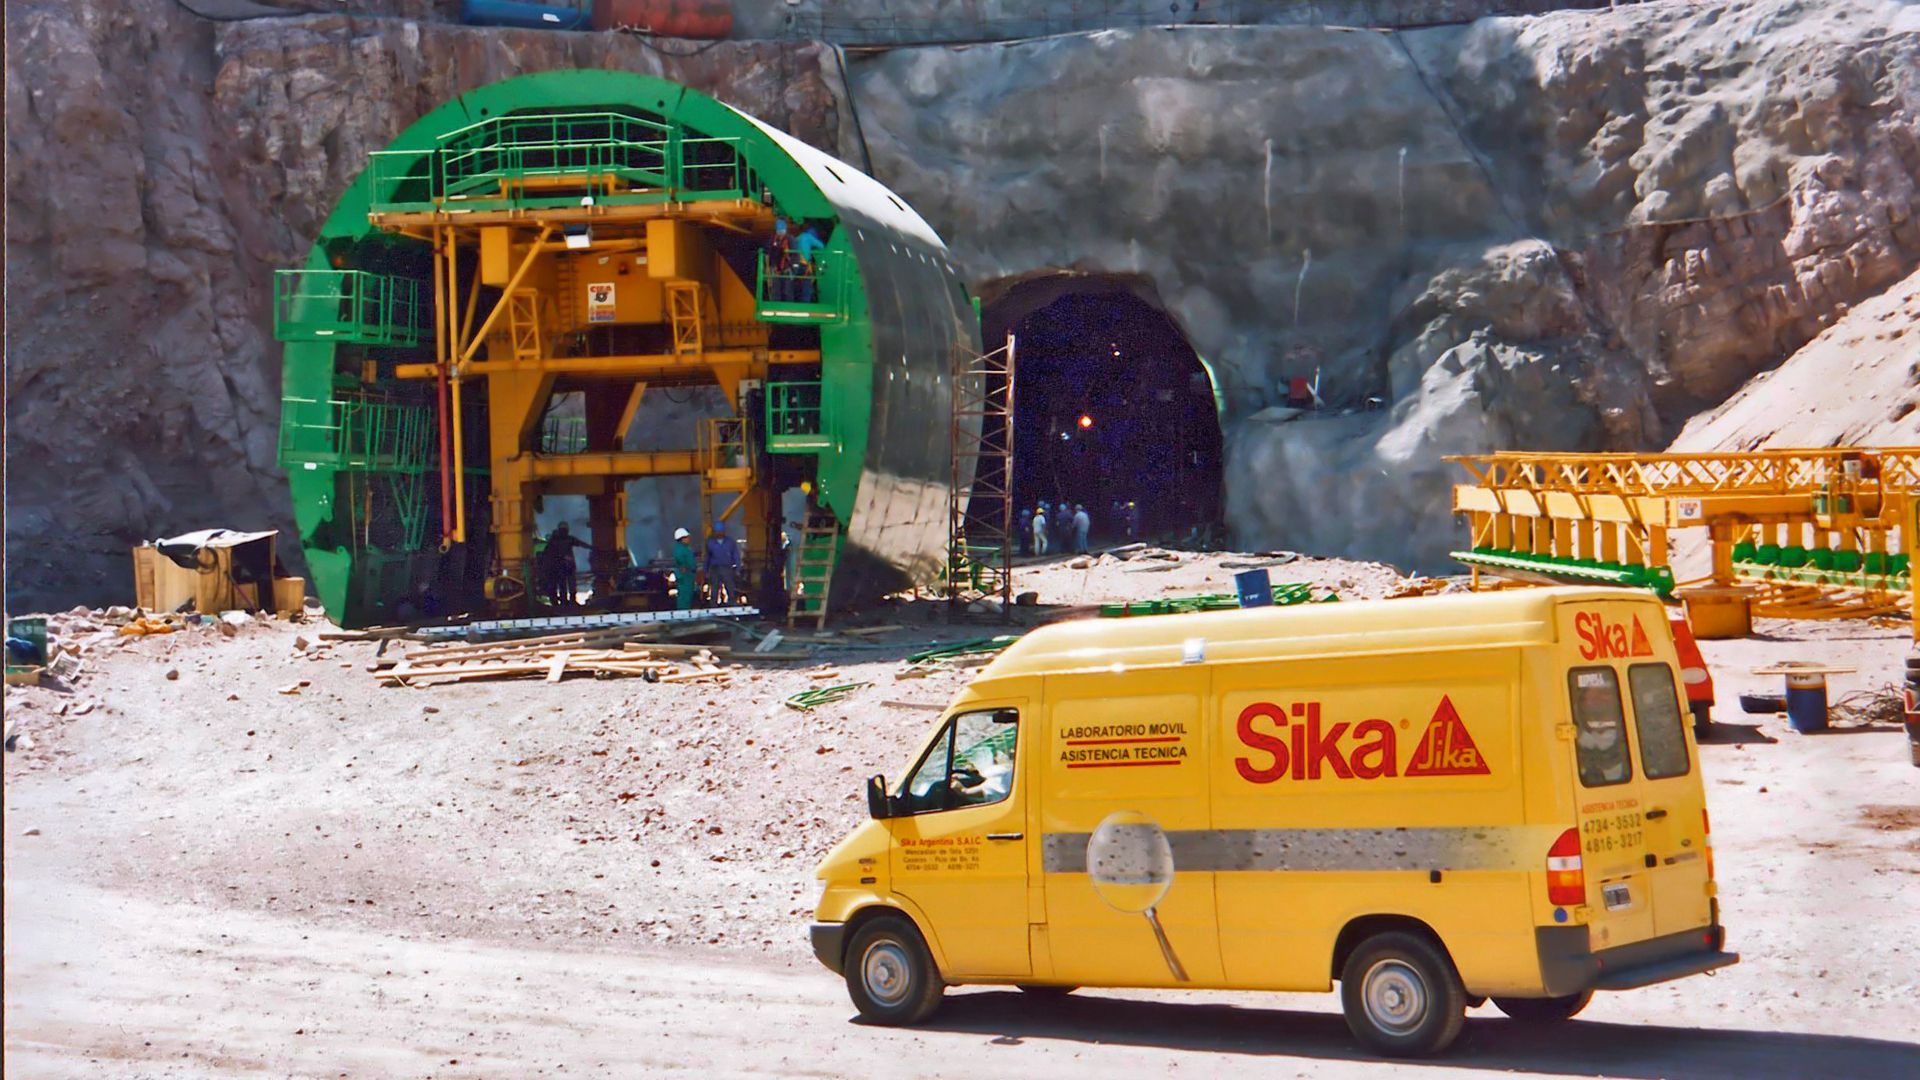 Sika van driving up to hydroelectric dam tunnel in Potrerillos, Argentina